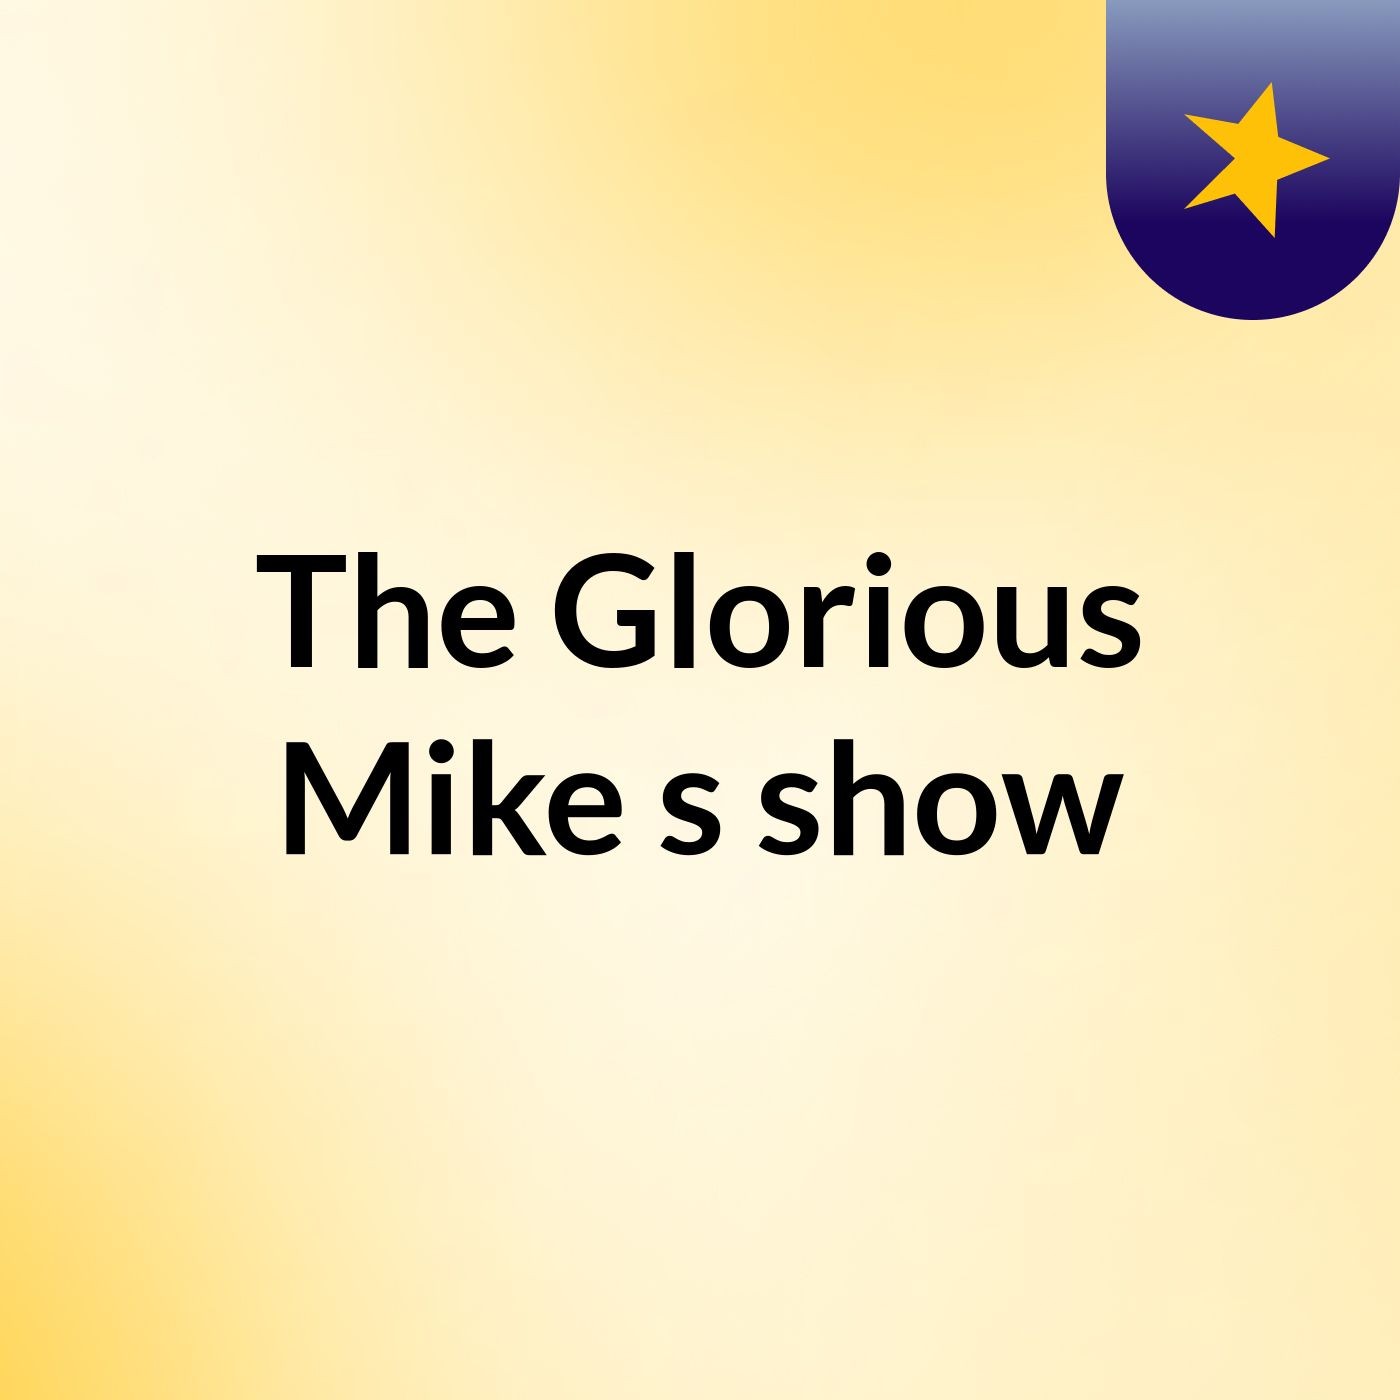 The Glorious Mike's show